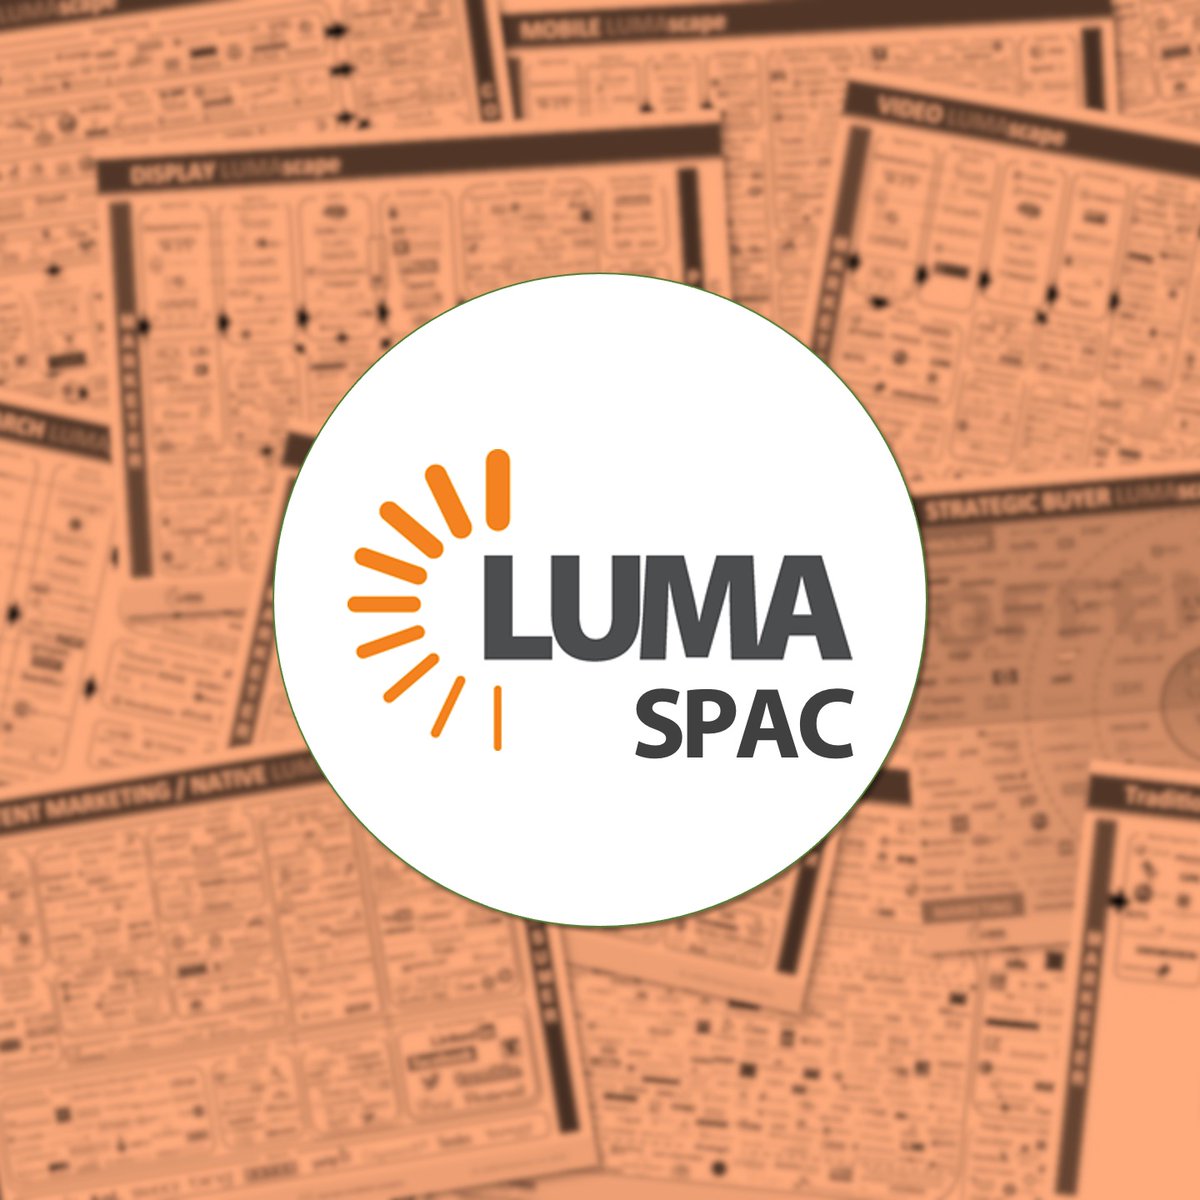 I will continue to follow this space closely and investigate ways for LUMA to participate by leveraging our deep sector knowledge, strong network of private companies, M&A deal-making leadership, banking prowess and marketing chops. Stay tuned. 15/15